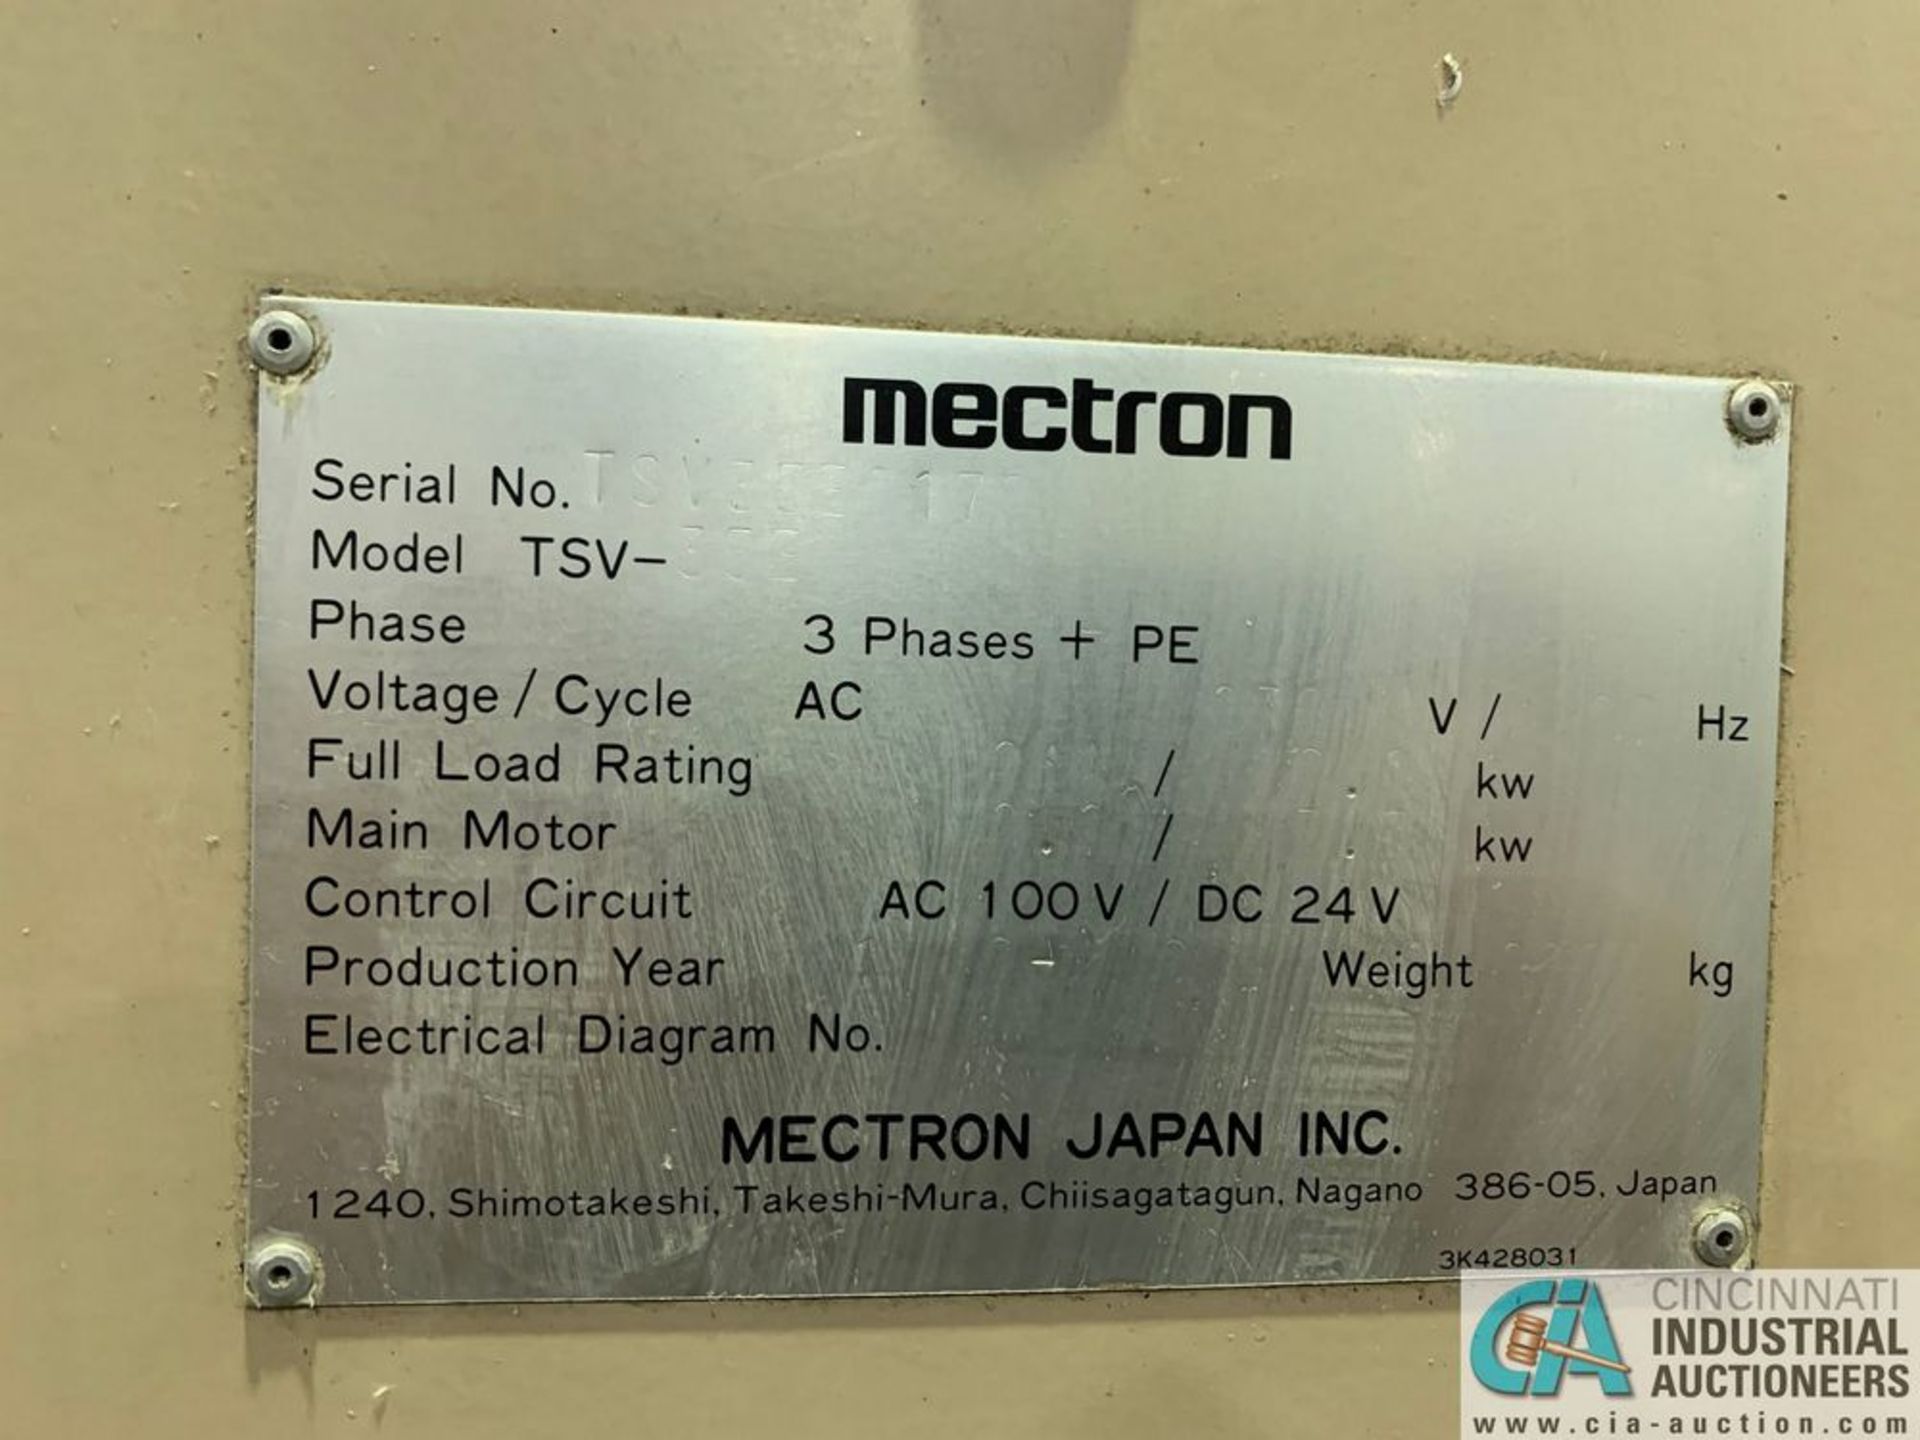 MECTRON MIYANO MODEL TSV-35L CNC DRILLING & TAPPING CENTER W/ 4TH AXIS; S/N TSV35E0172, *Loading fee - Image 6 of 7